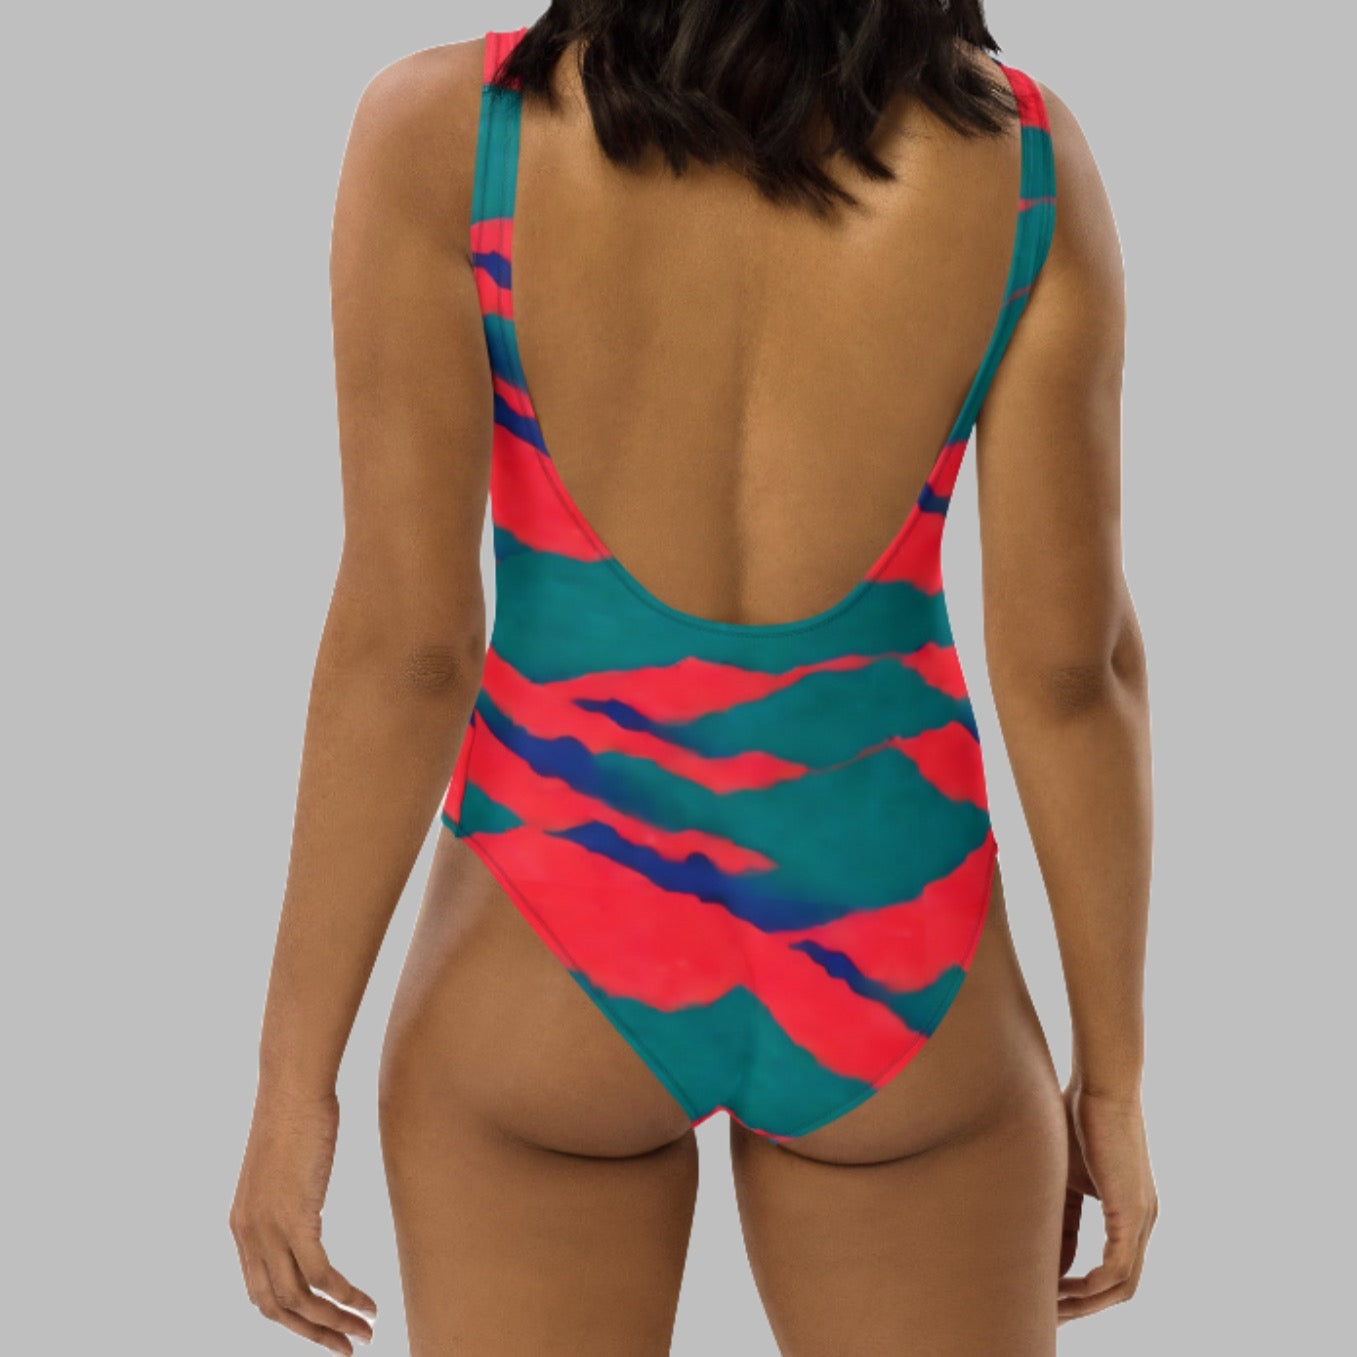 Neon Red Sunset Teal Mountains One-Piece Swimsuit